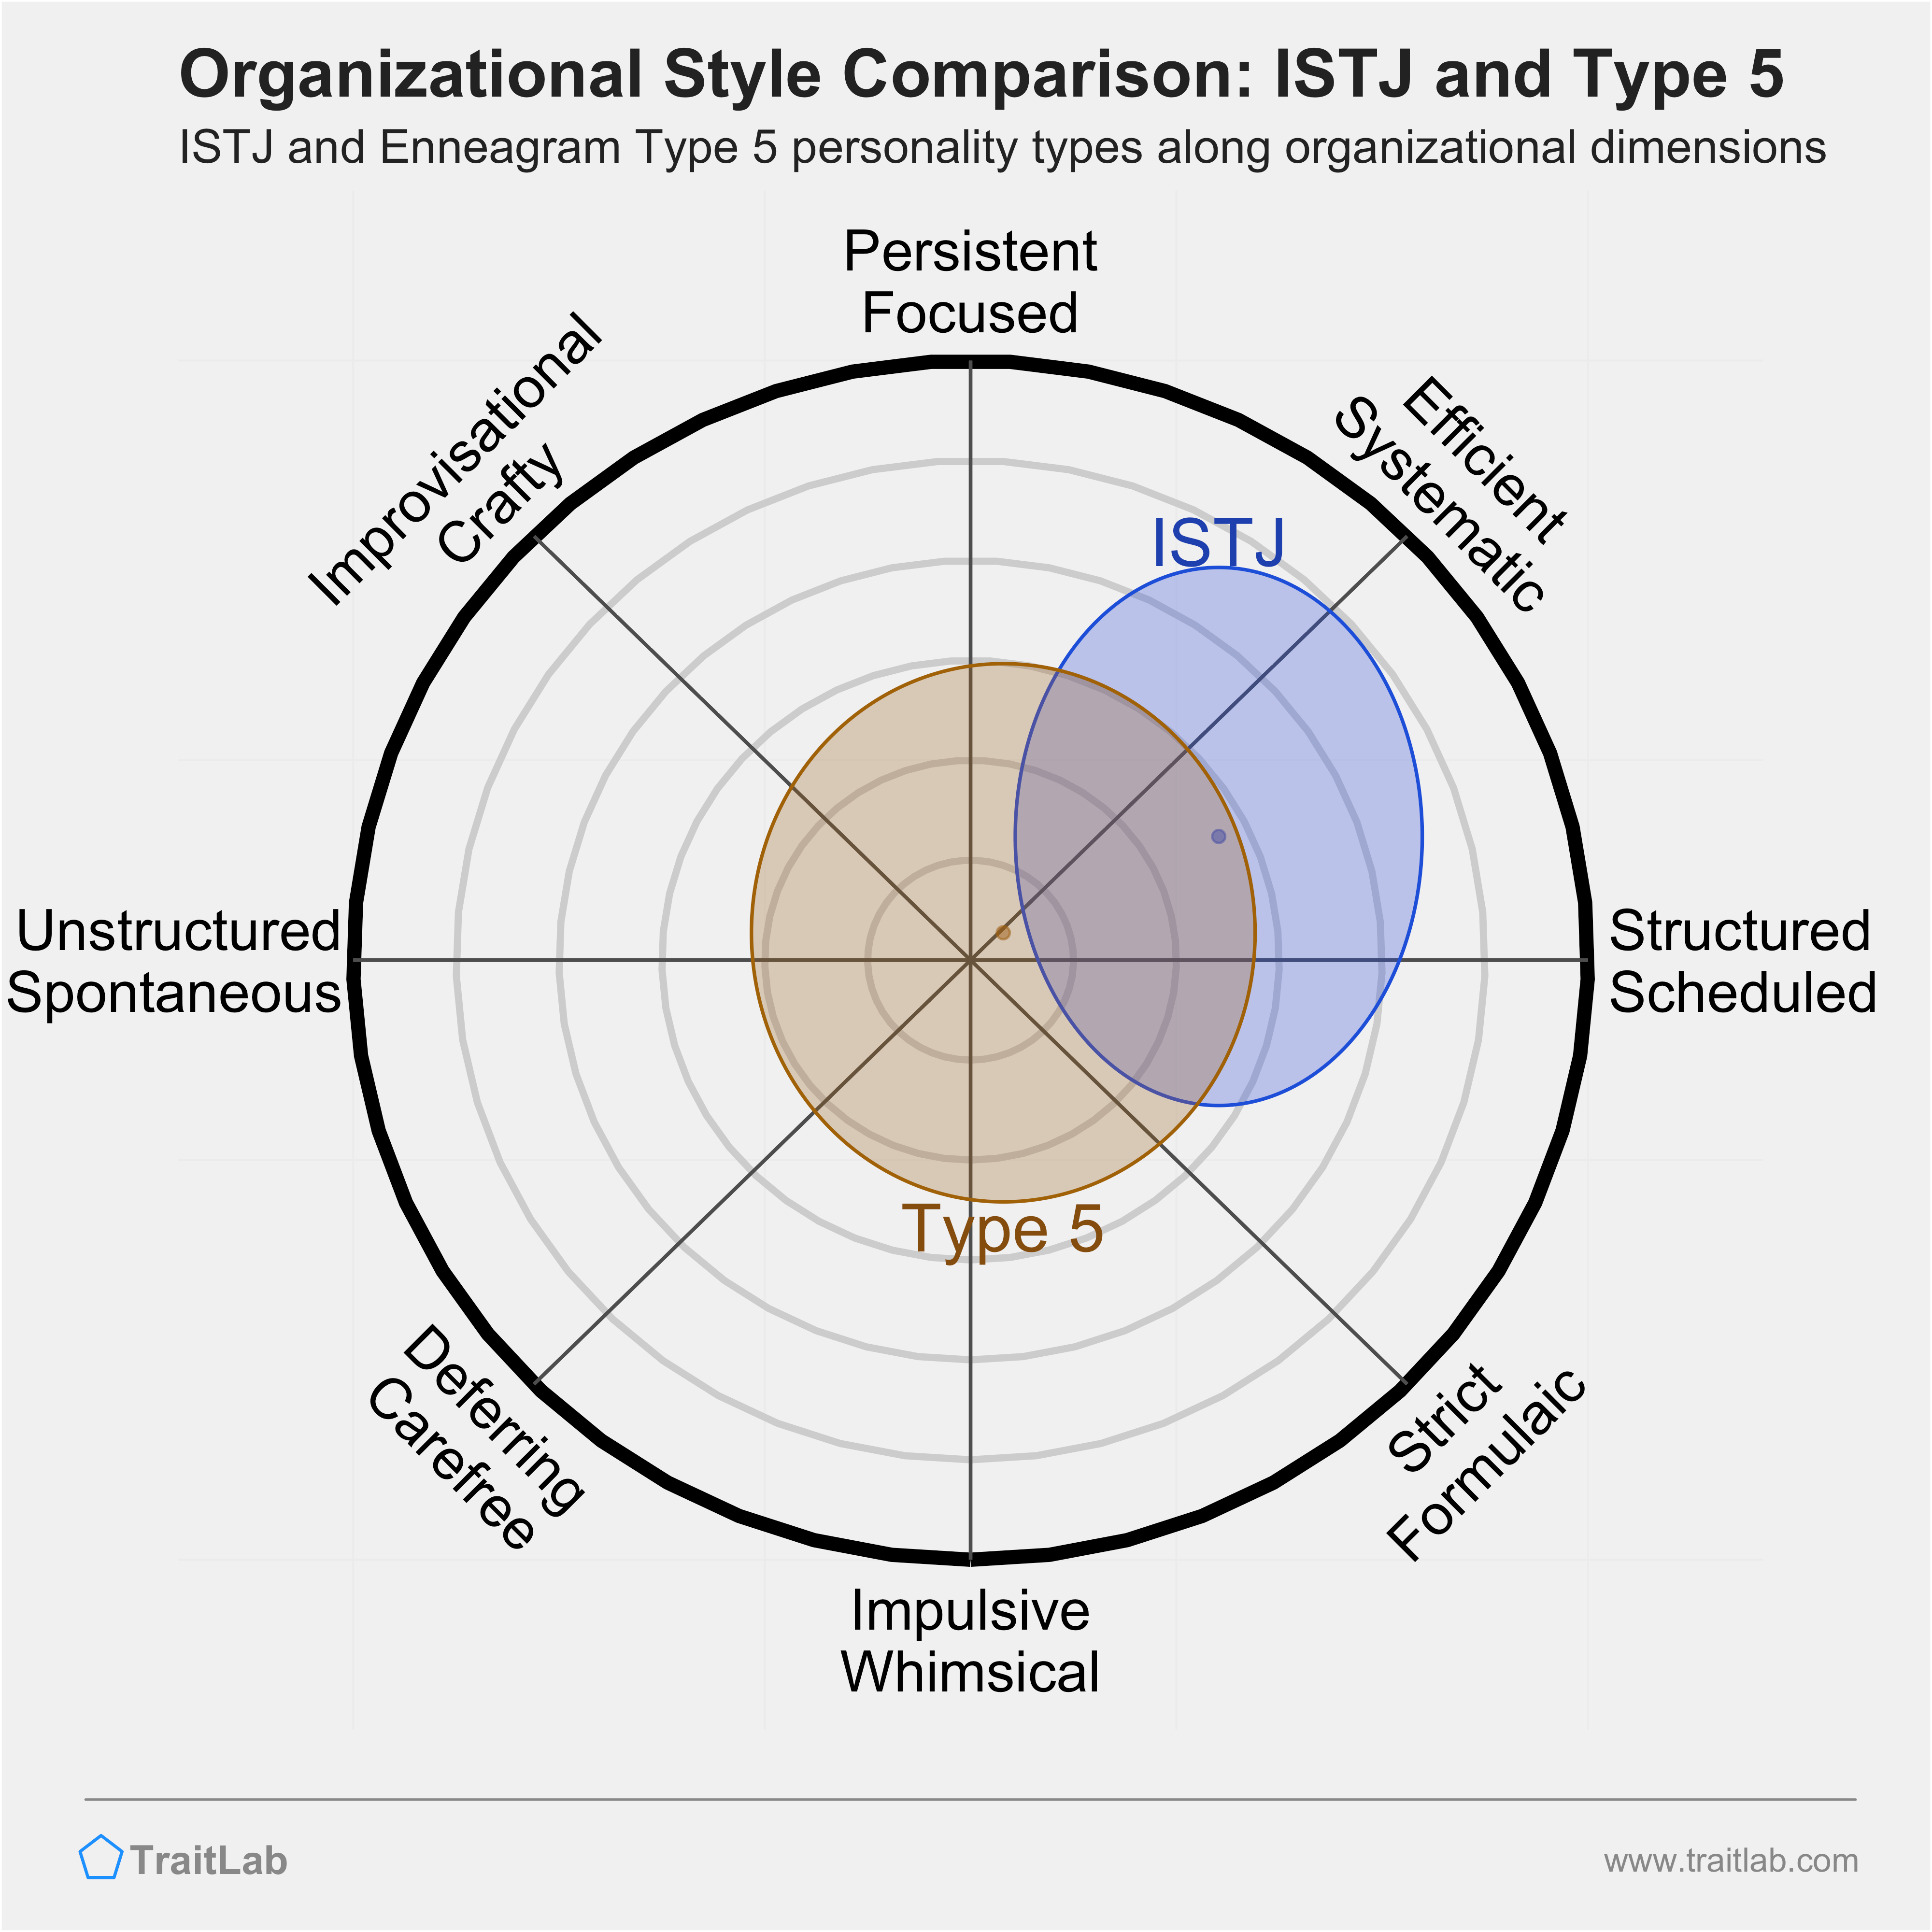 ISTJ and Type 5 comparison across organizational dimensions